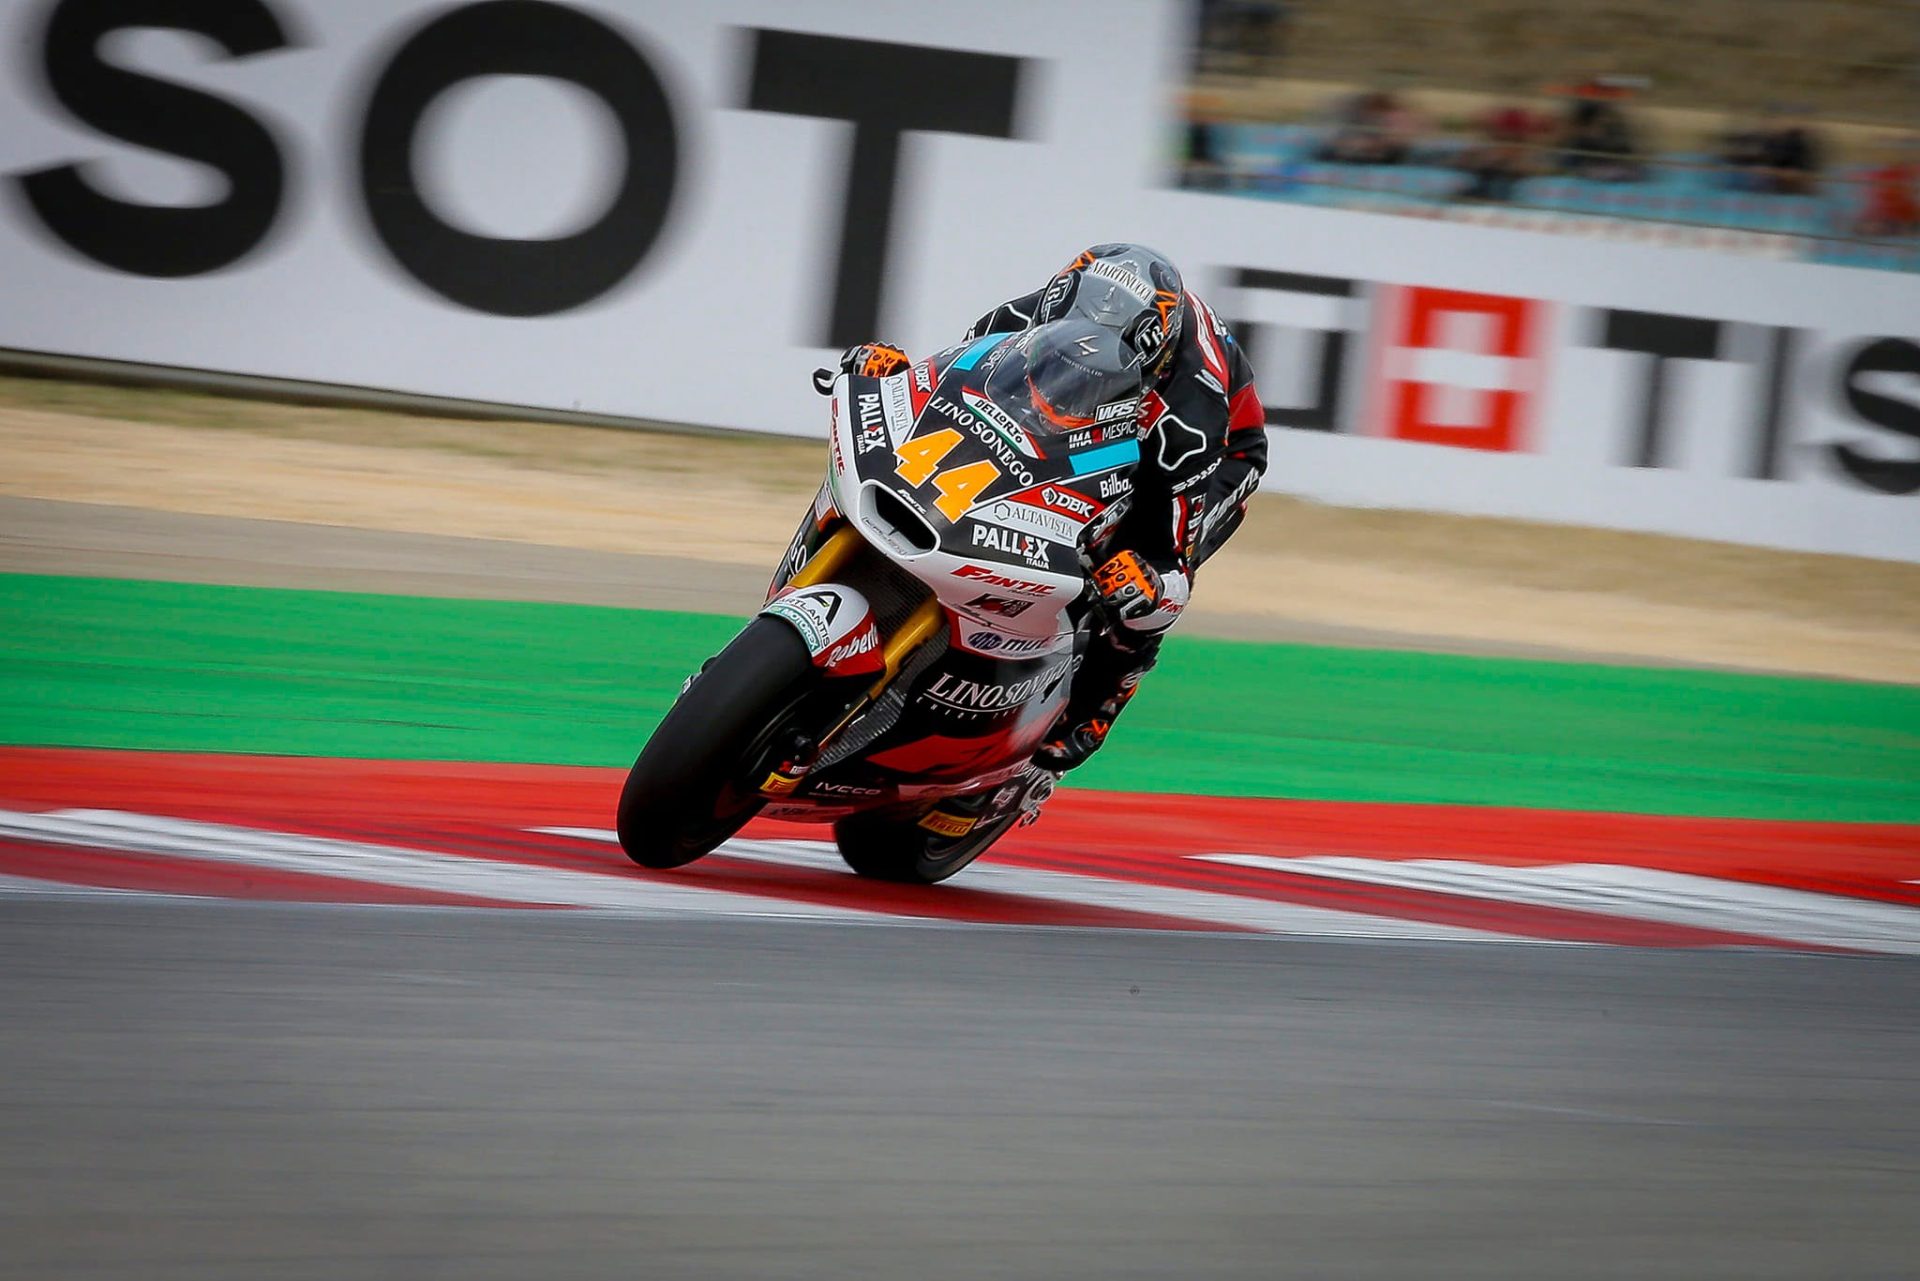 Canet Triumphs: Secures First Moto2 Victory in Thrilling Race at Portimao